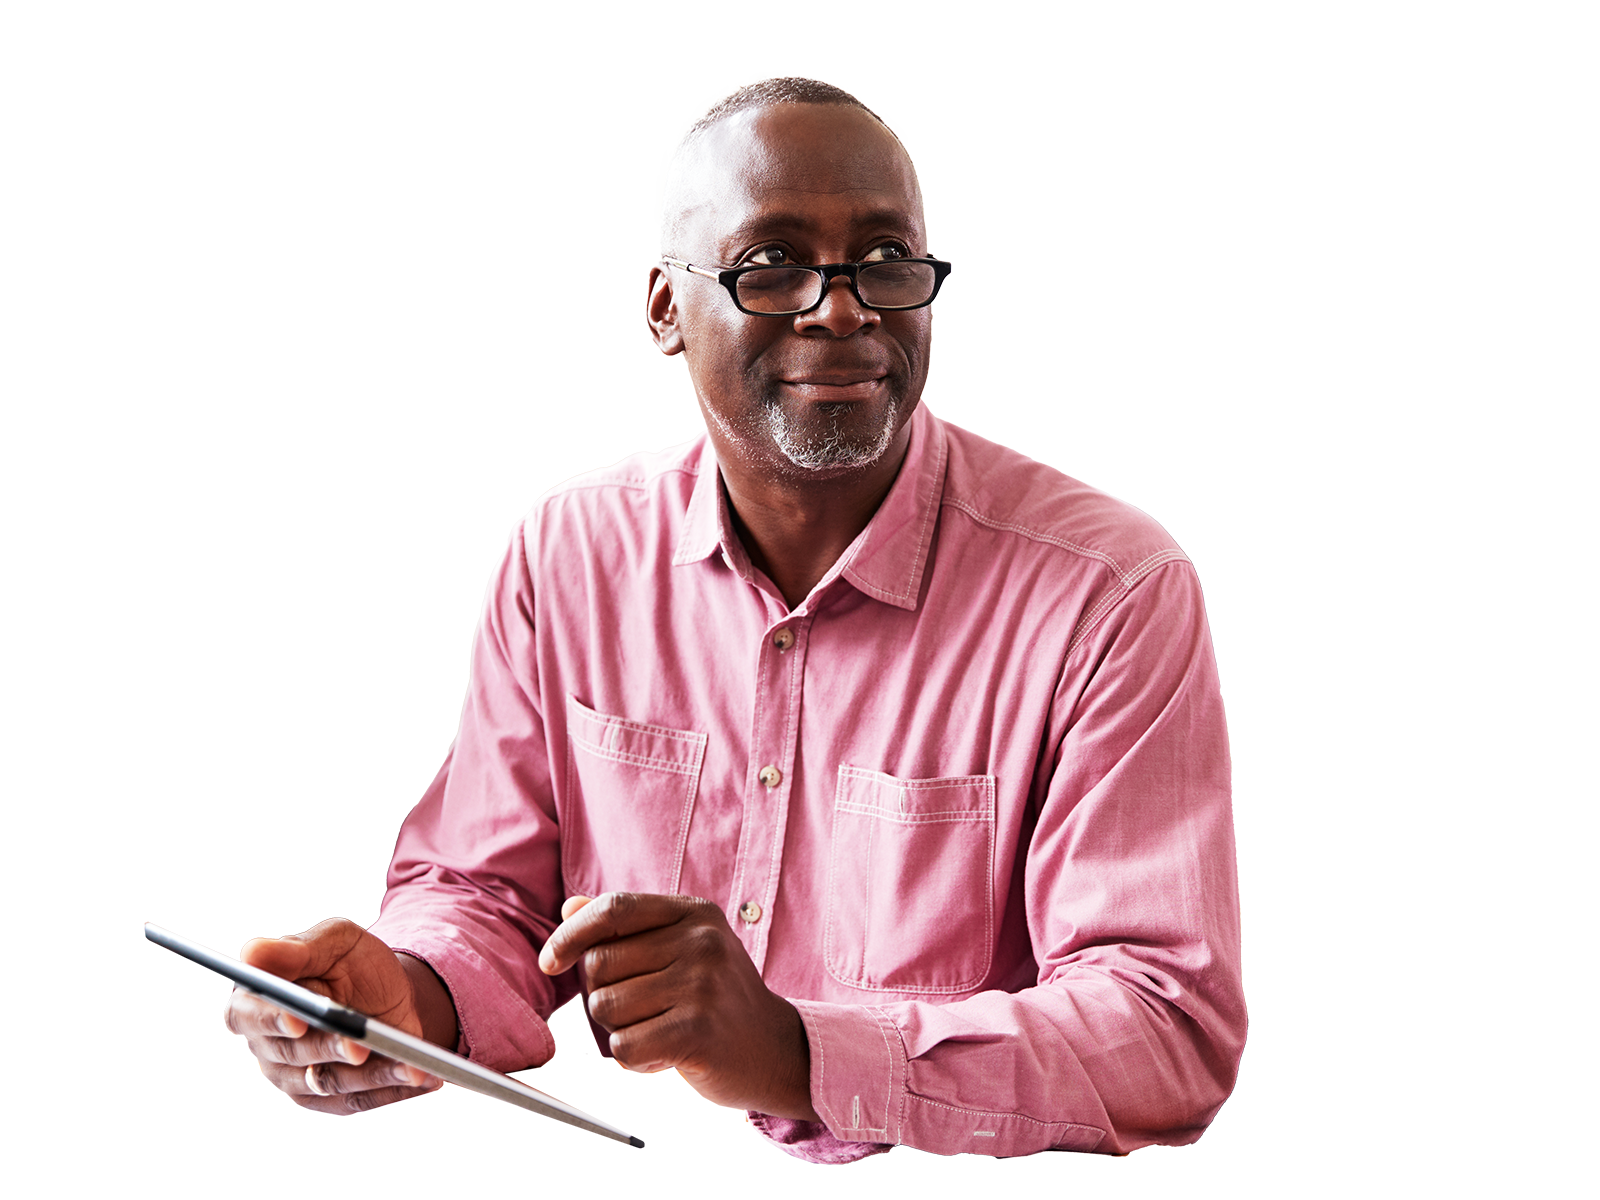 Confident male security analyst sitting at a desk with background illustrations representing security like a document icon and a fingerprint.